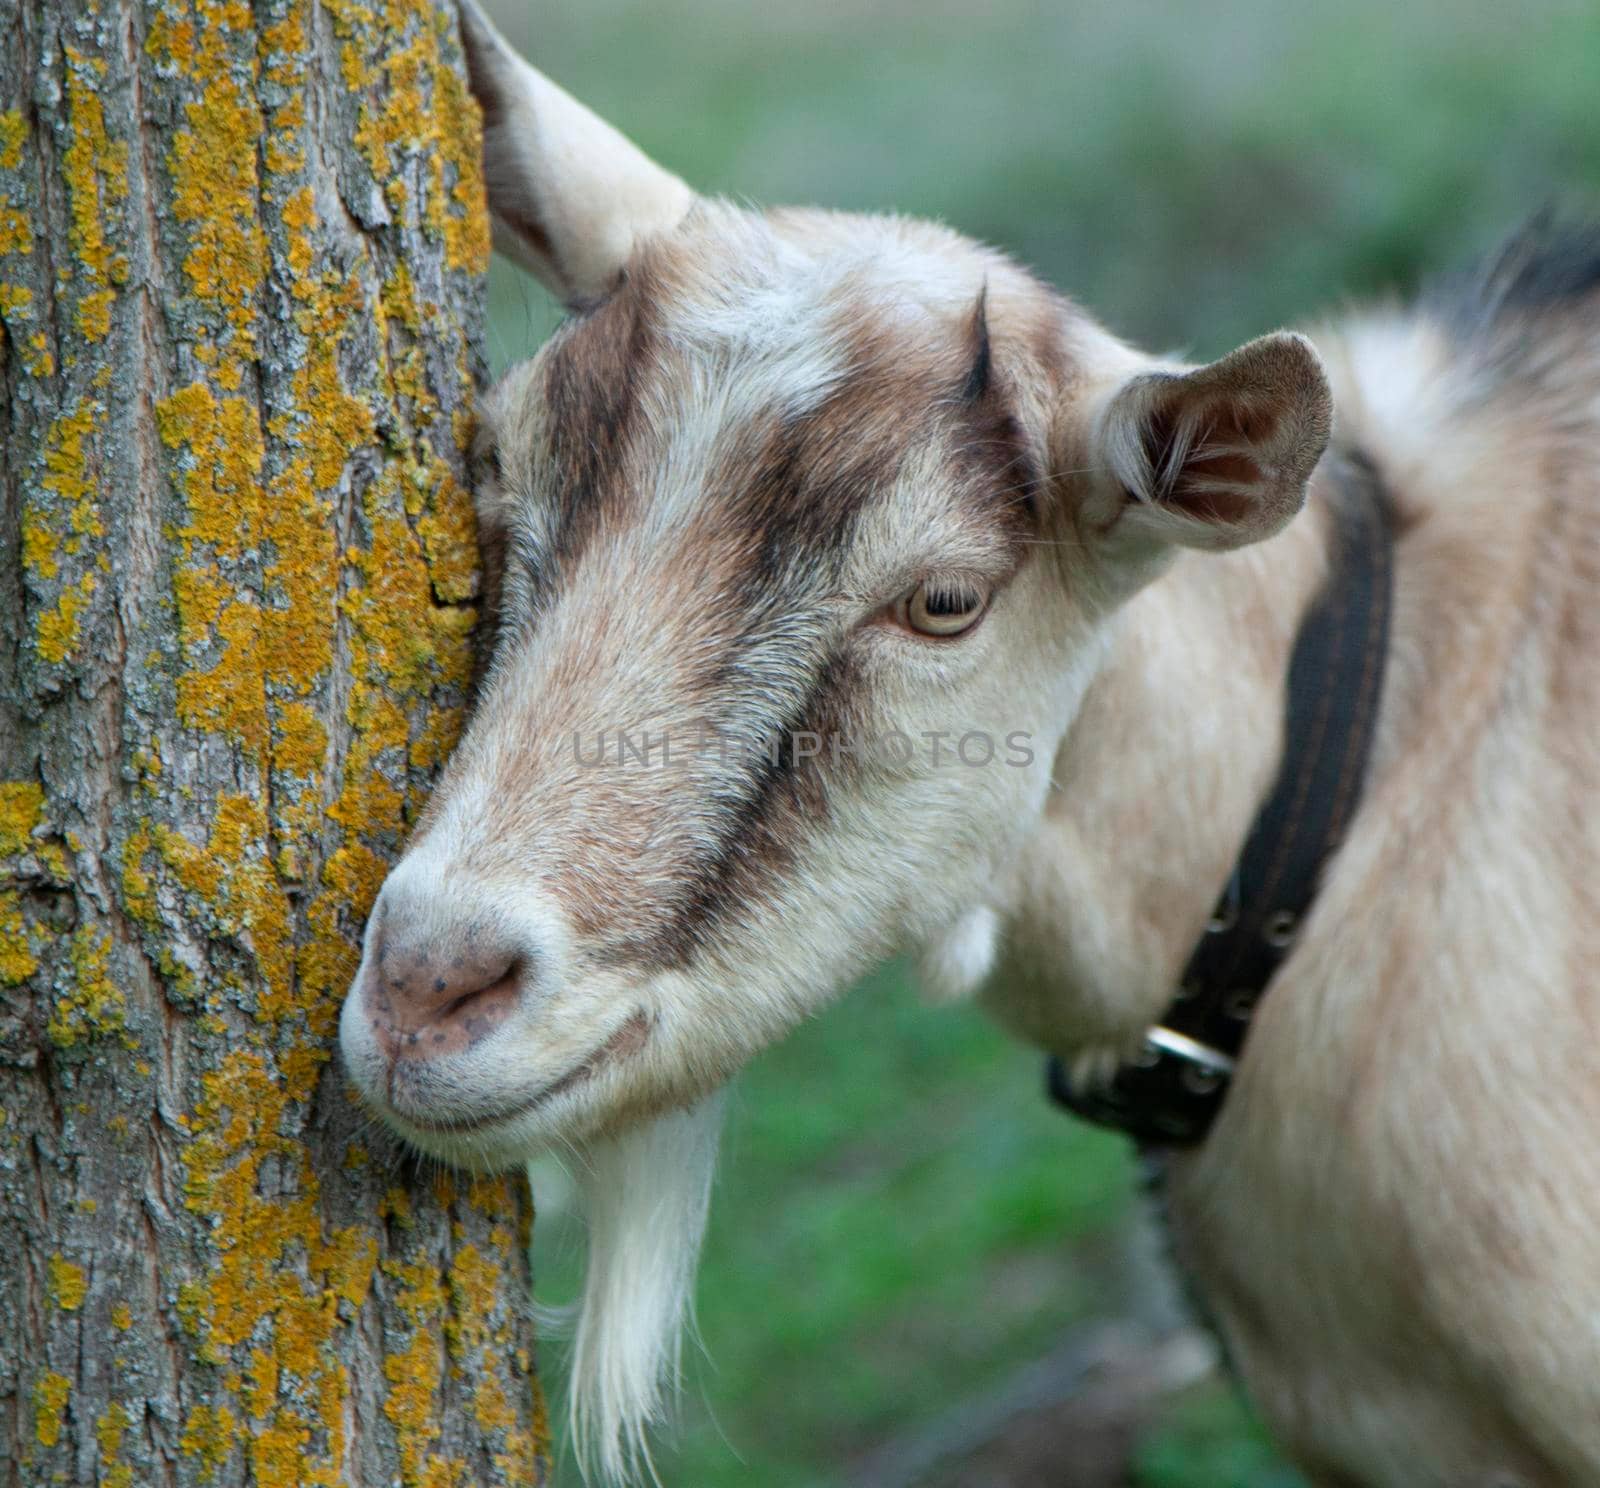 Goat. Portrait of a goat on a farm in the village by SlayCer